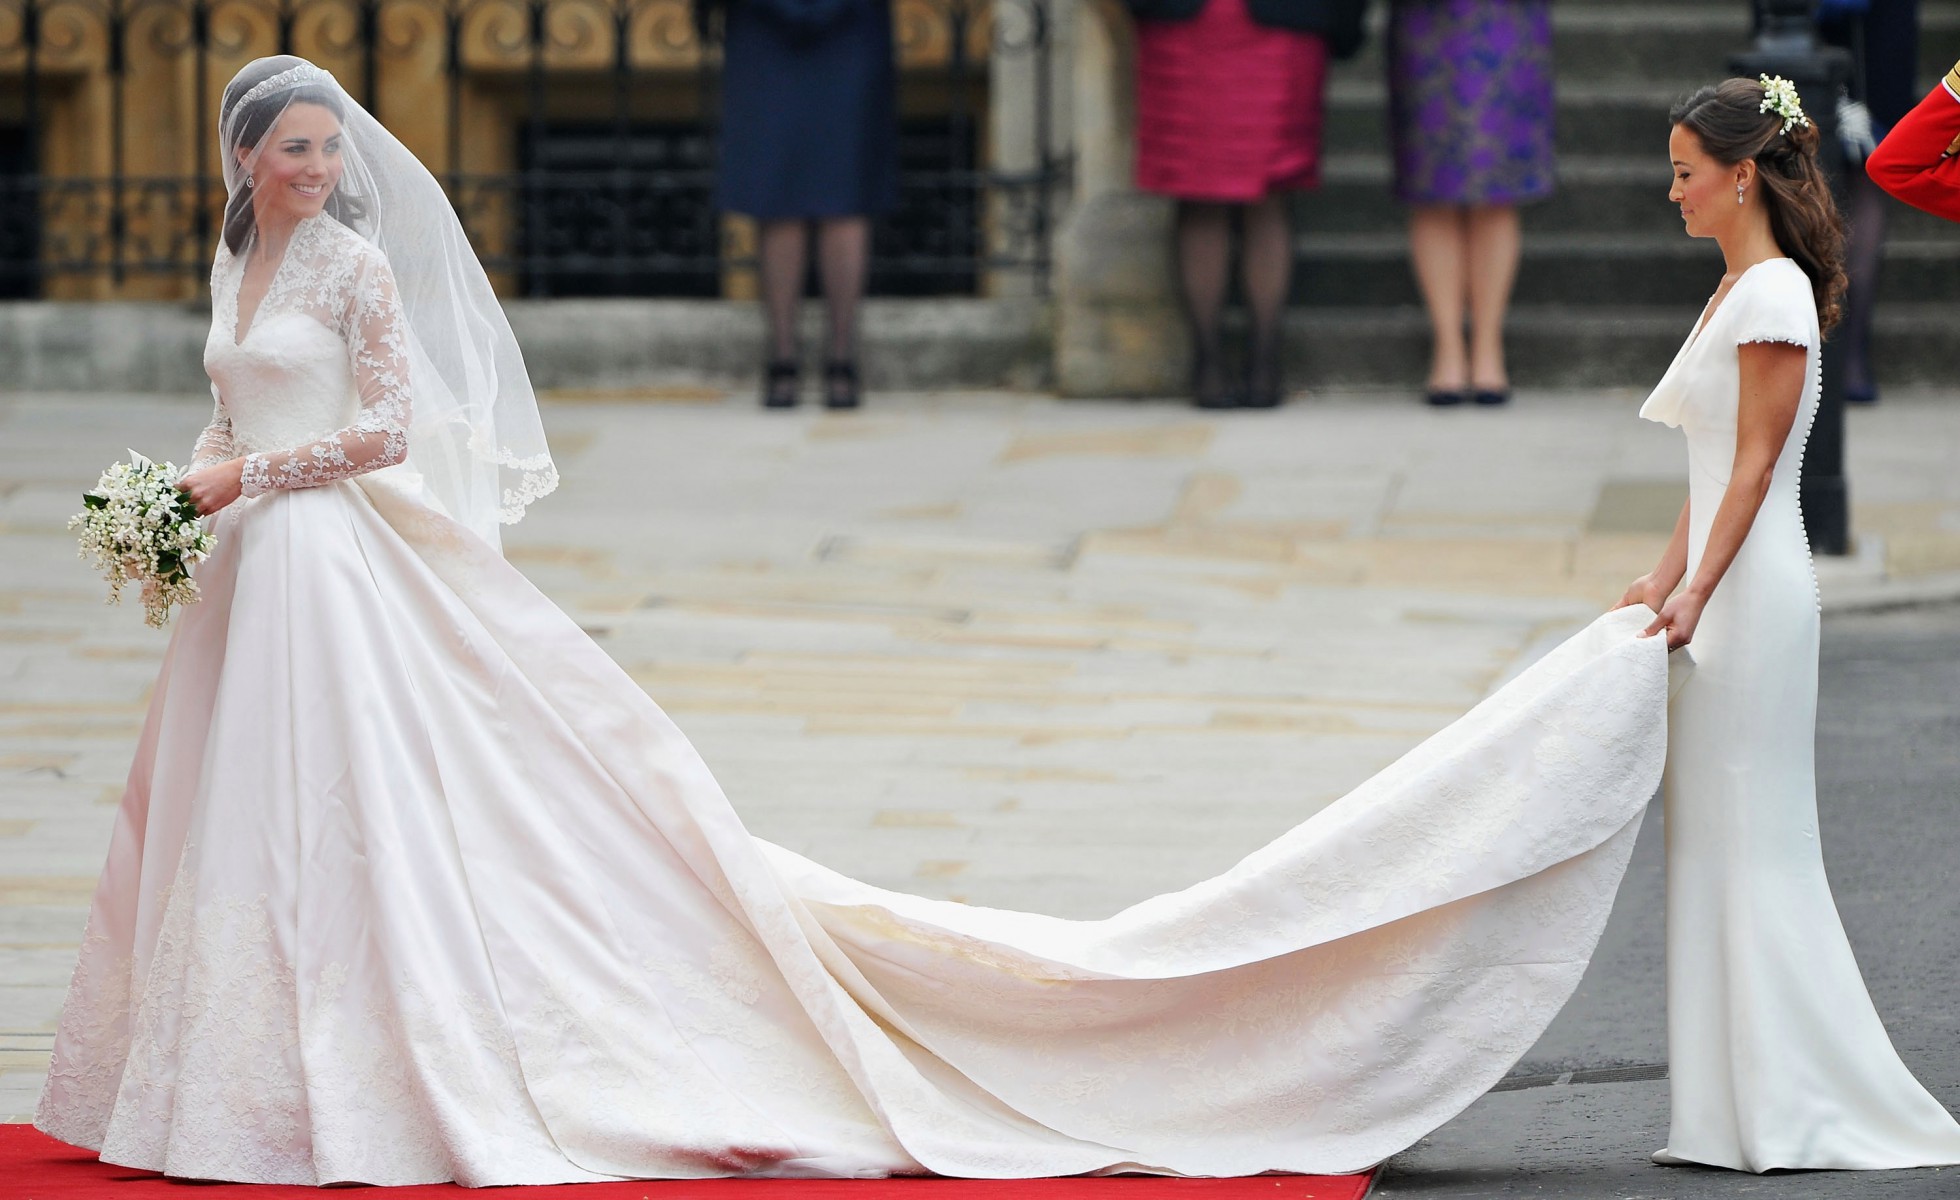 Bridesmaid Pippa Middleton became an instant star